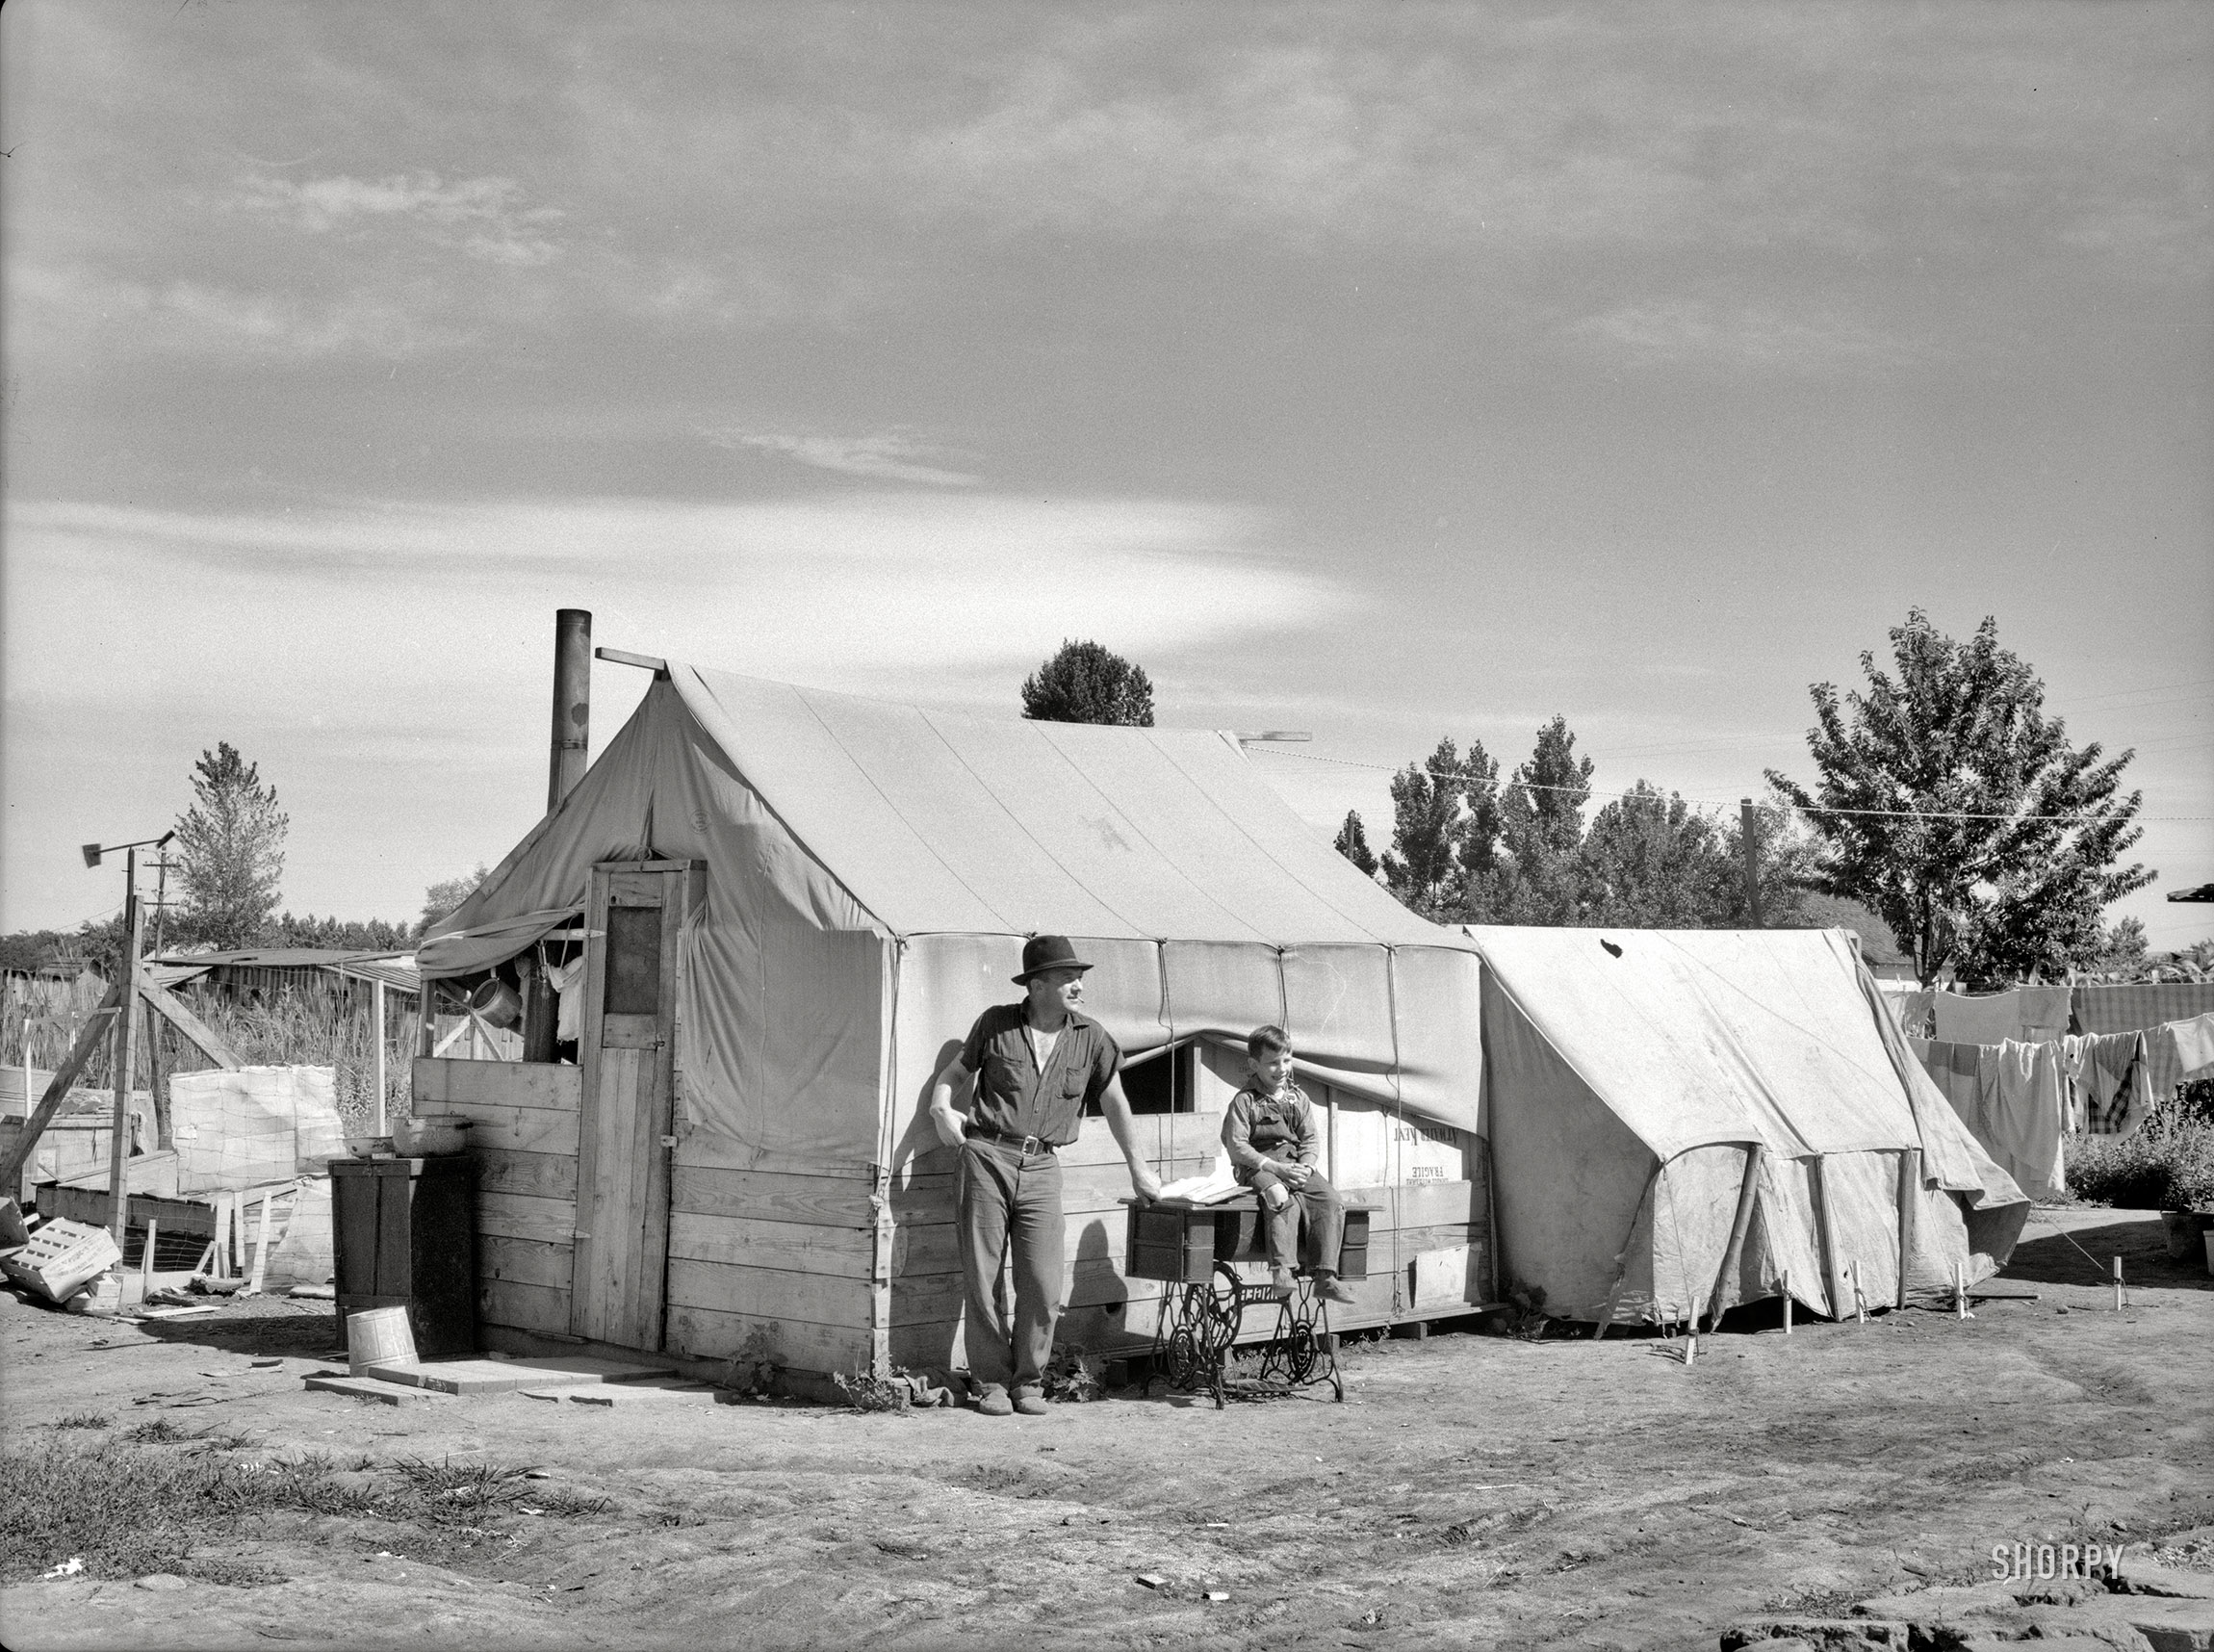 July 1936. "Migratory workers' camp in Yakima, Washington." Displaced farm families from the Dust Bowl states working as laborers in the Northwest's fruit orchards, living in government-run tent camps. Medium-format nitrate negative by Arthur Rothstein for the Resettlement Administration. View full size.